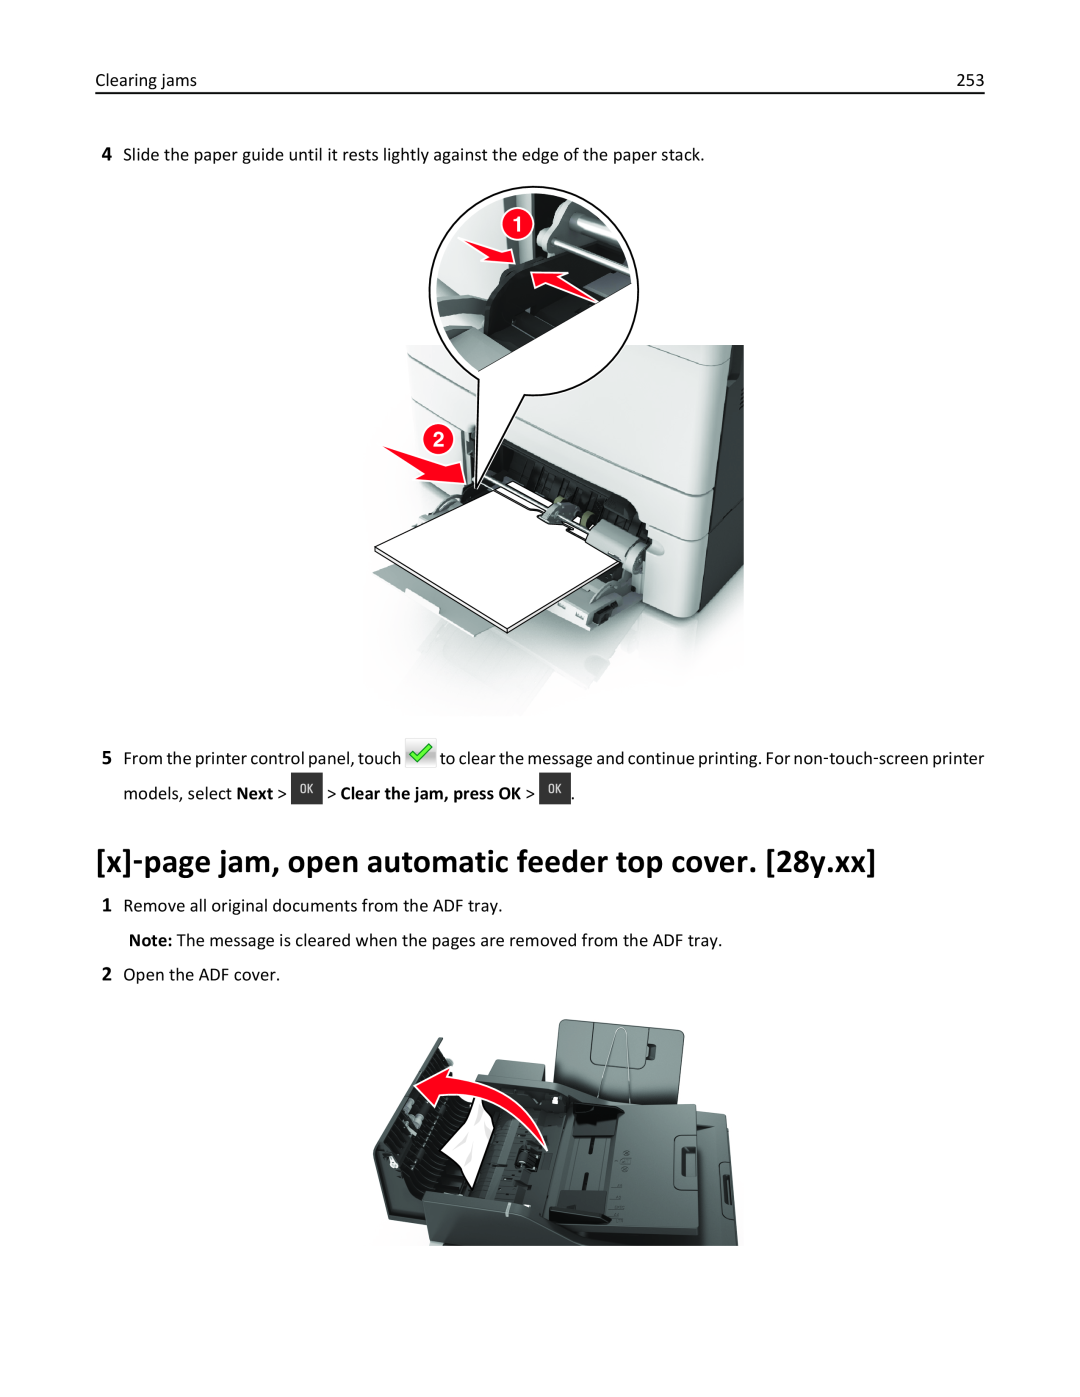 Lexmark 436 manual x‑page jam, open automatic feeder top cover. 28y.xx, models, select Next Clear the jam, press OK 